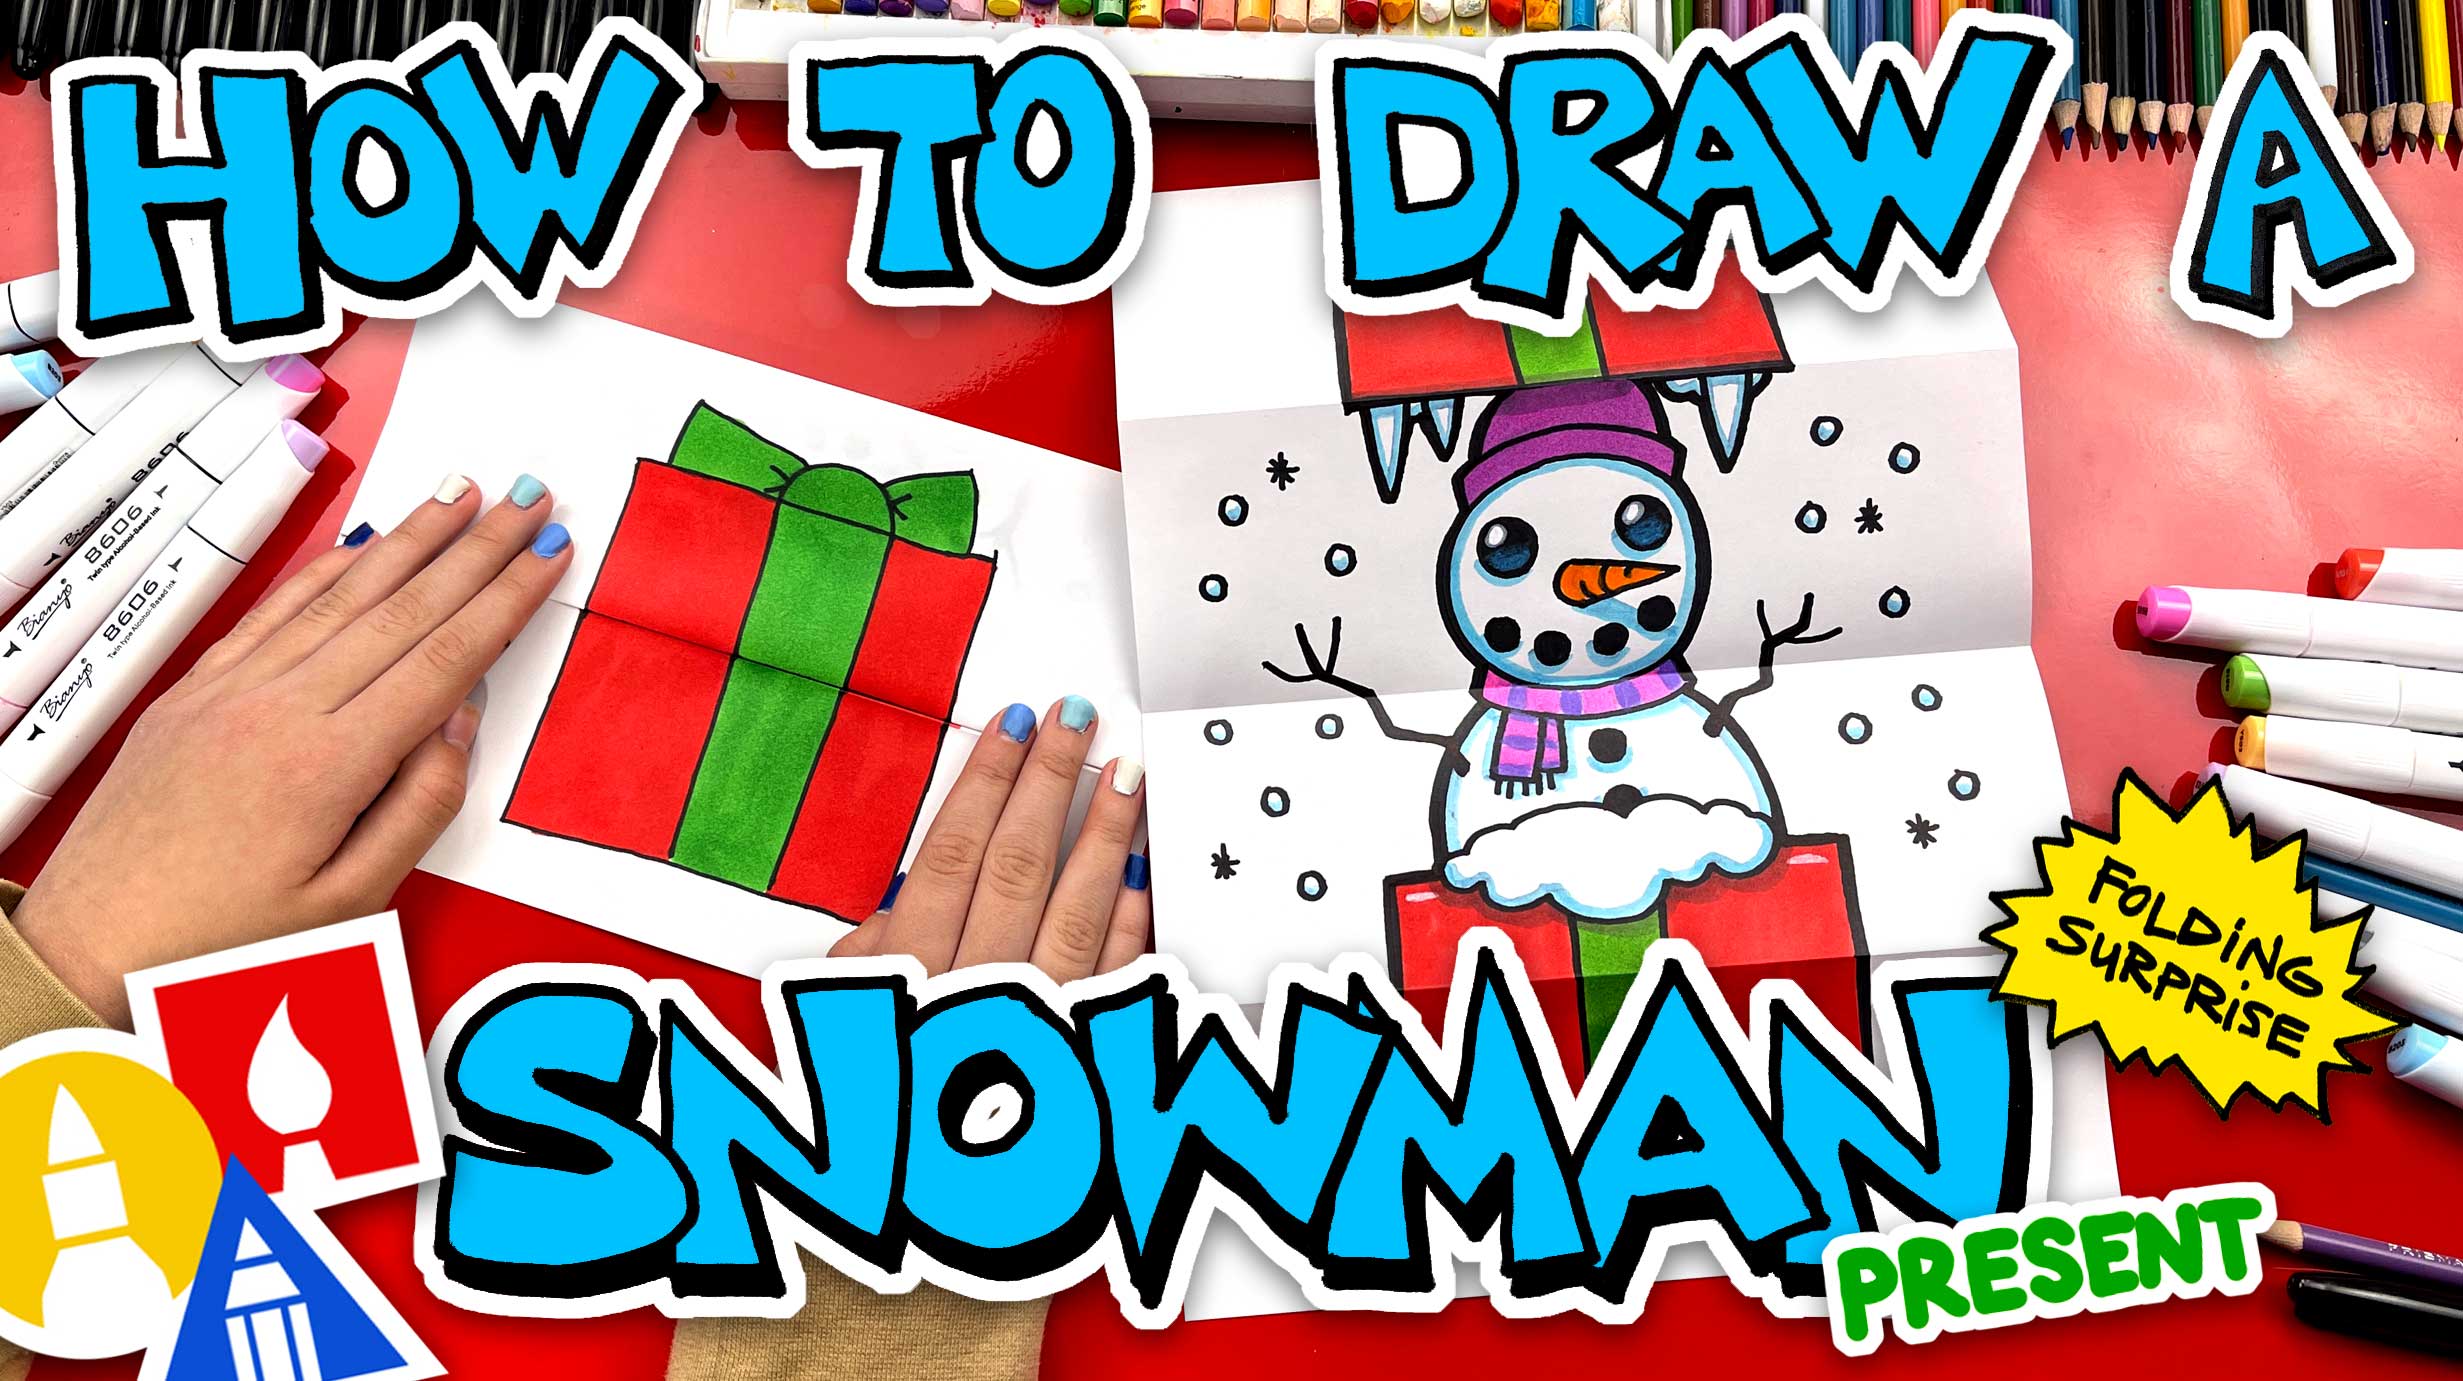 How To Draw A Snowman Folding Surprise Draw A Snowman Art For Kids ...